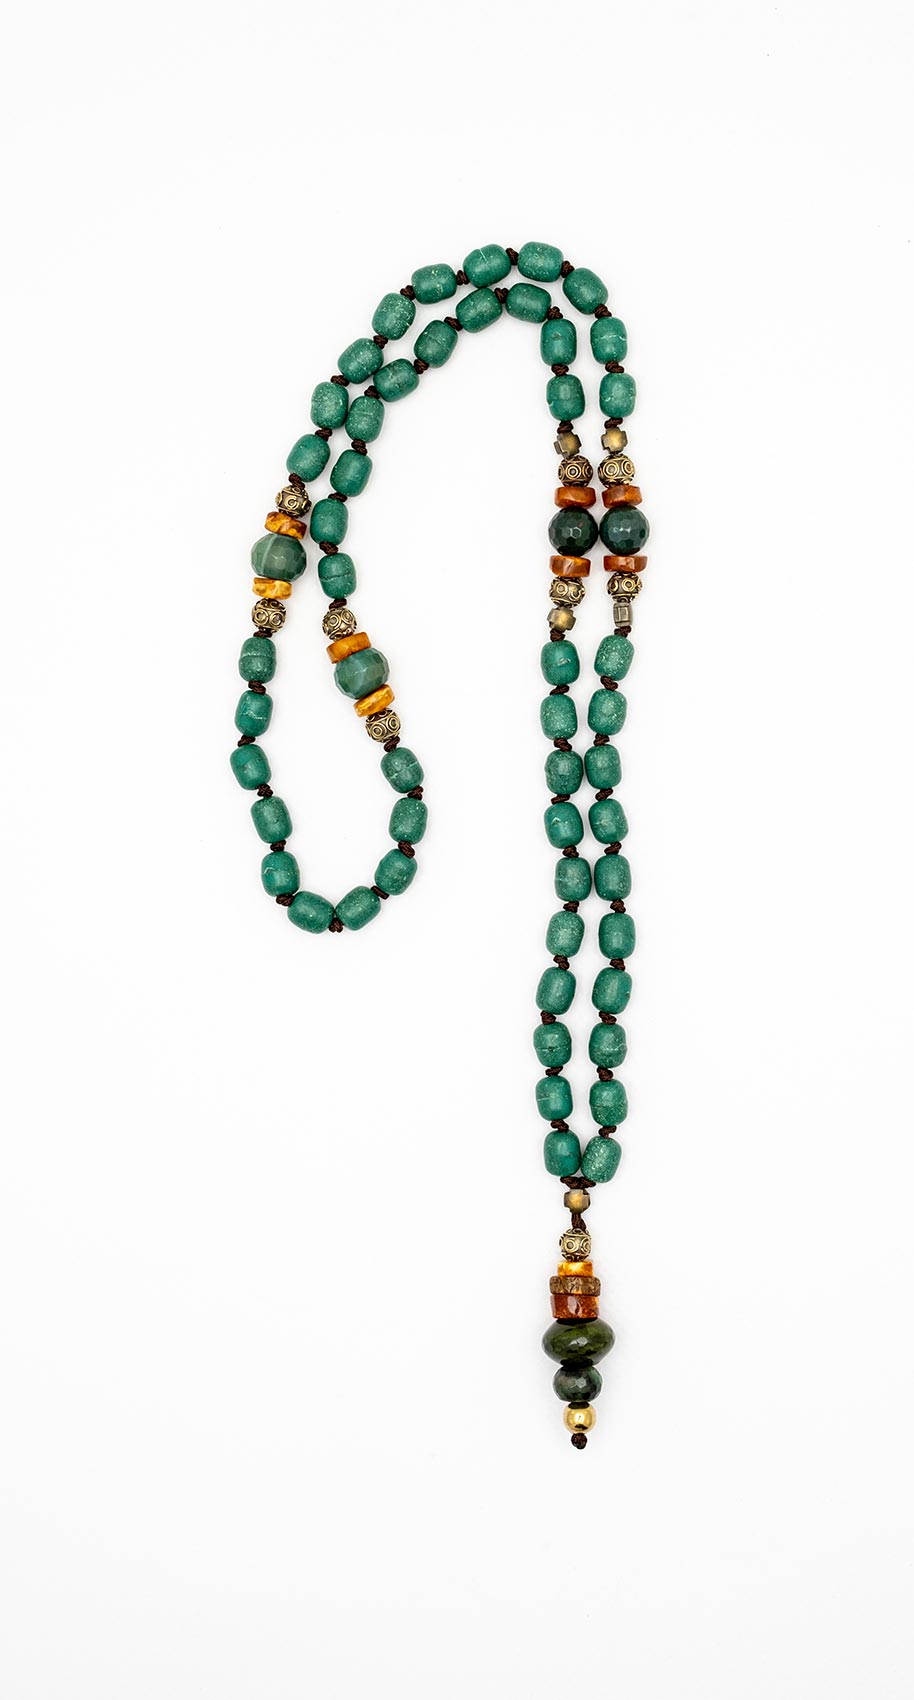 Catholic prayer beads (Rozary) made of a Mixture of Artificial Resins with Incense, genuine amber from Baltic sea-cut by hand, Agates and tin.